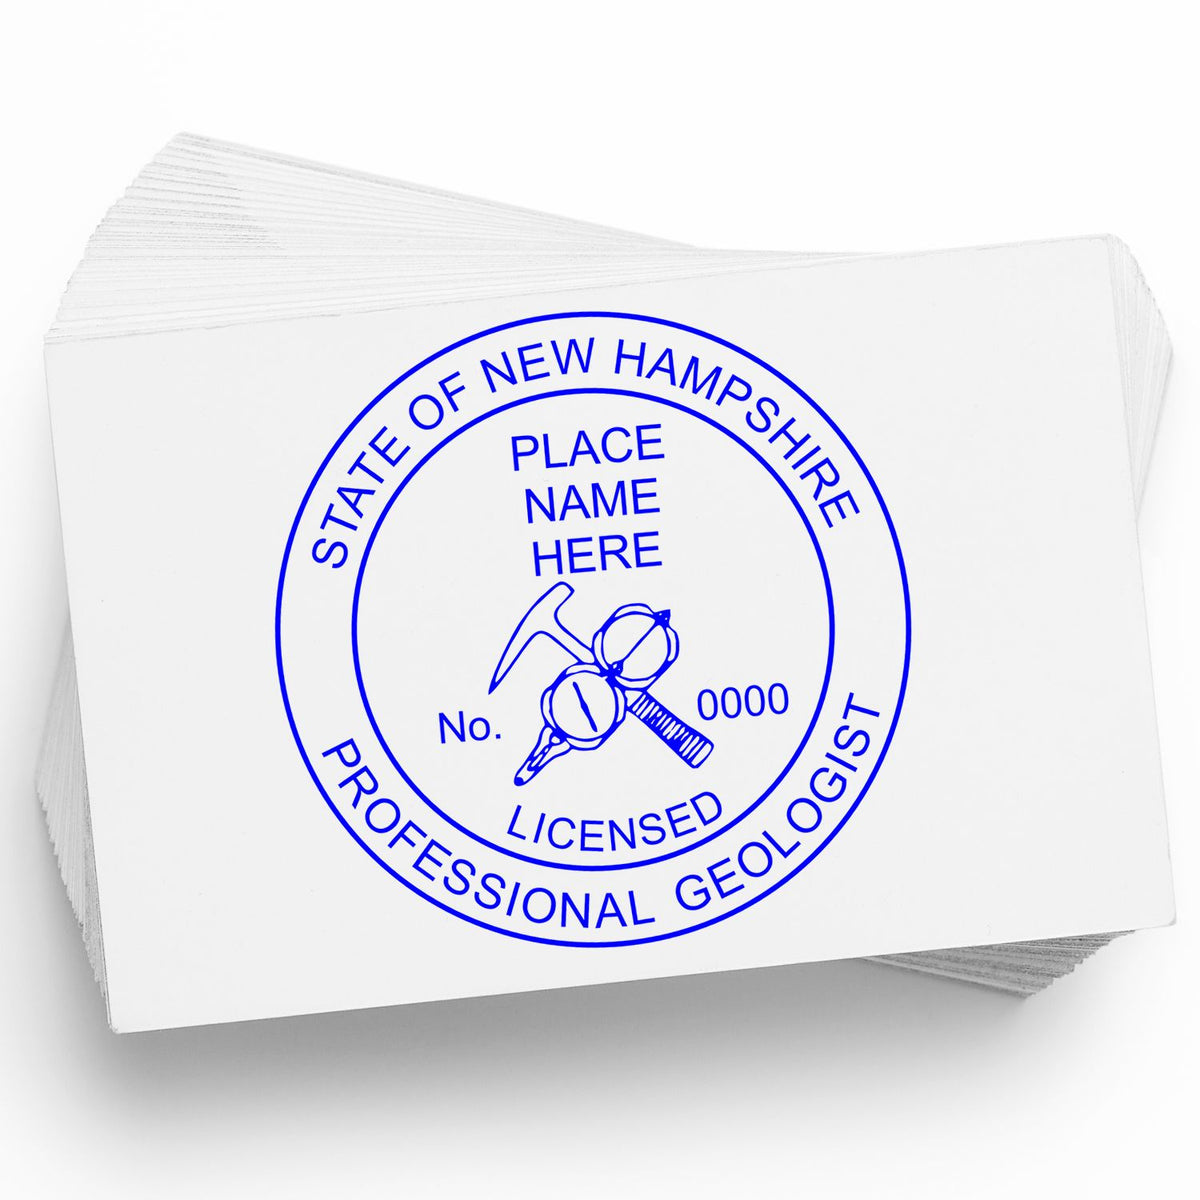 The Slim Pre-Inked New Hampshire Professional Geologist Seal Stamp stamp impression comes to life with a crisp, detailed image stamped on paper - showcasing true professional quality.